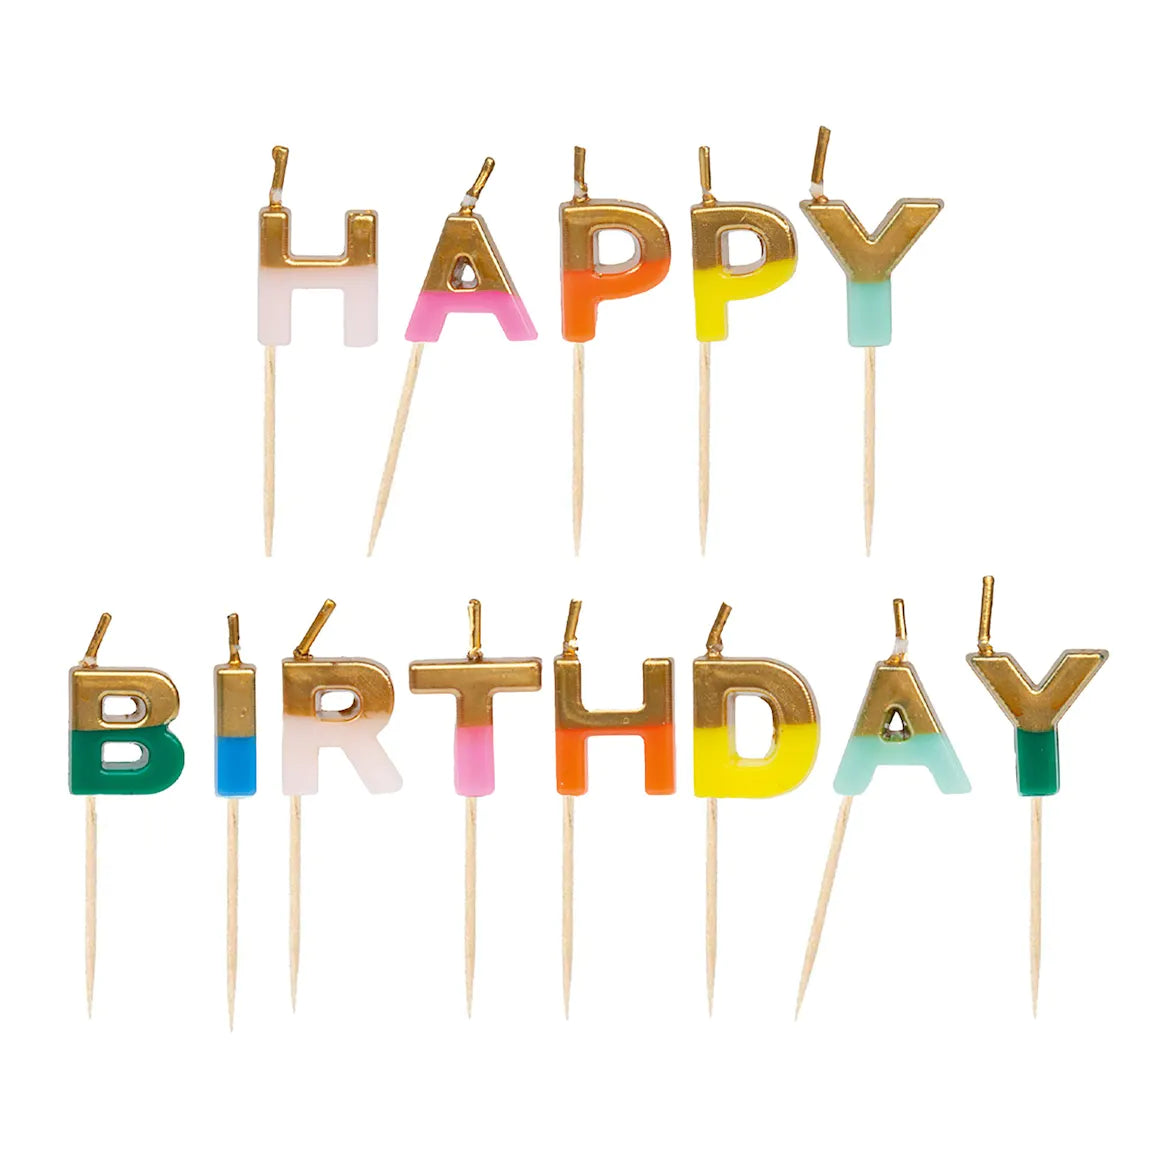 Rainbow "Happy Birthday" Letter Candle Pack By Talking Tables